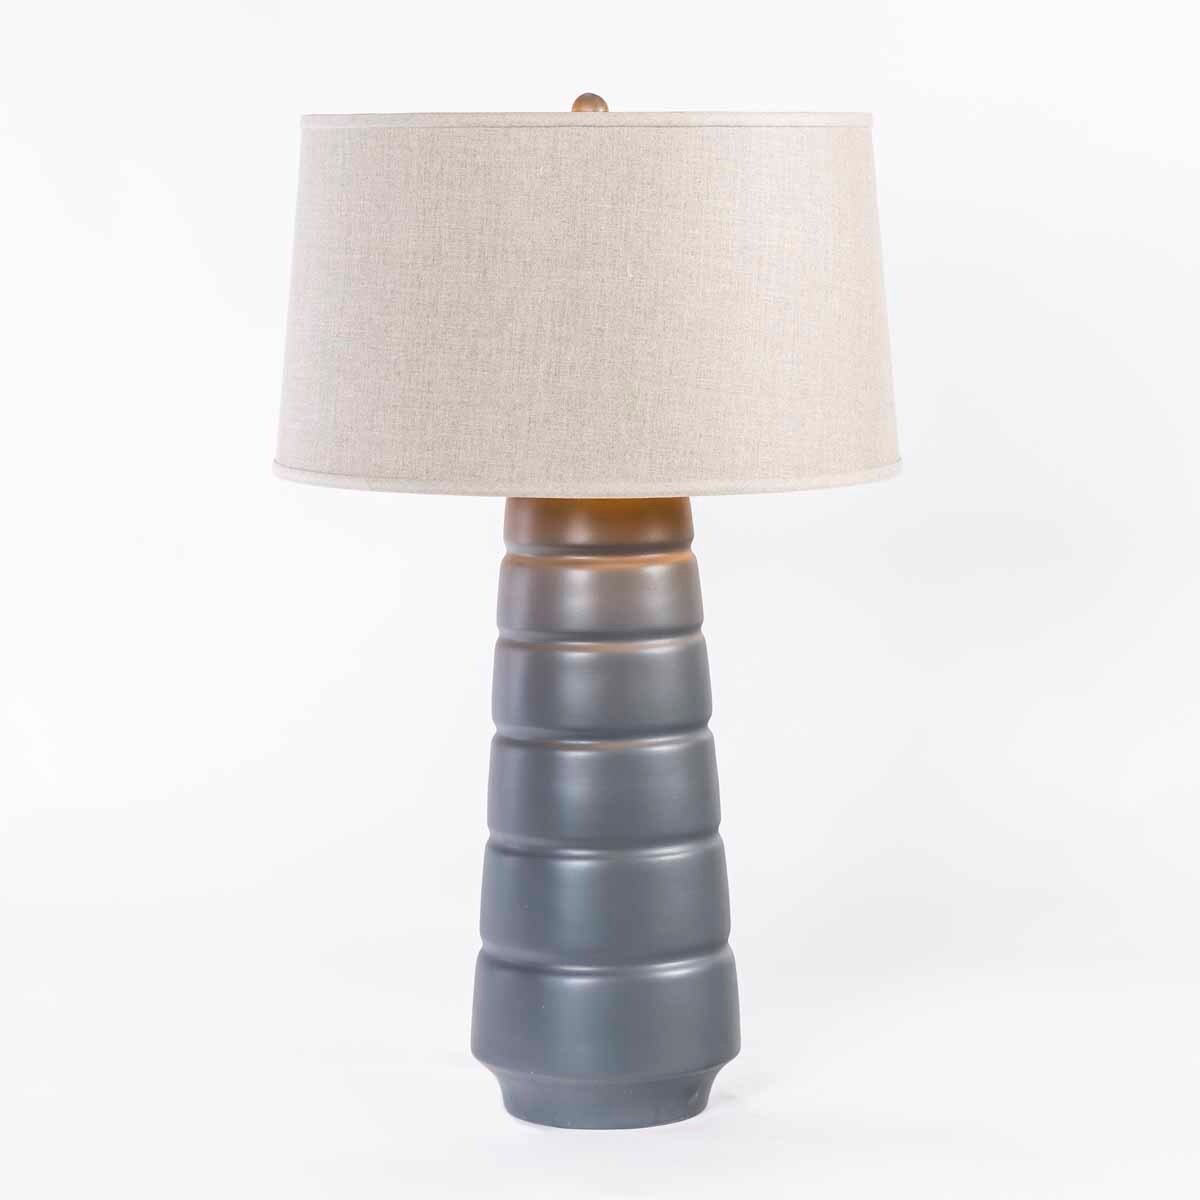 Madison Table Lamp In Cambridge Finish, Madison Table Lamp Made In China